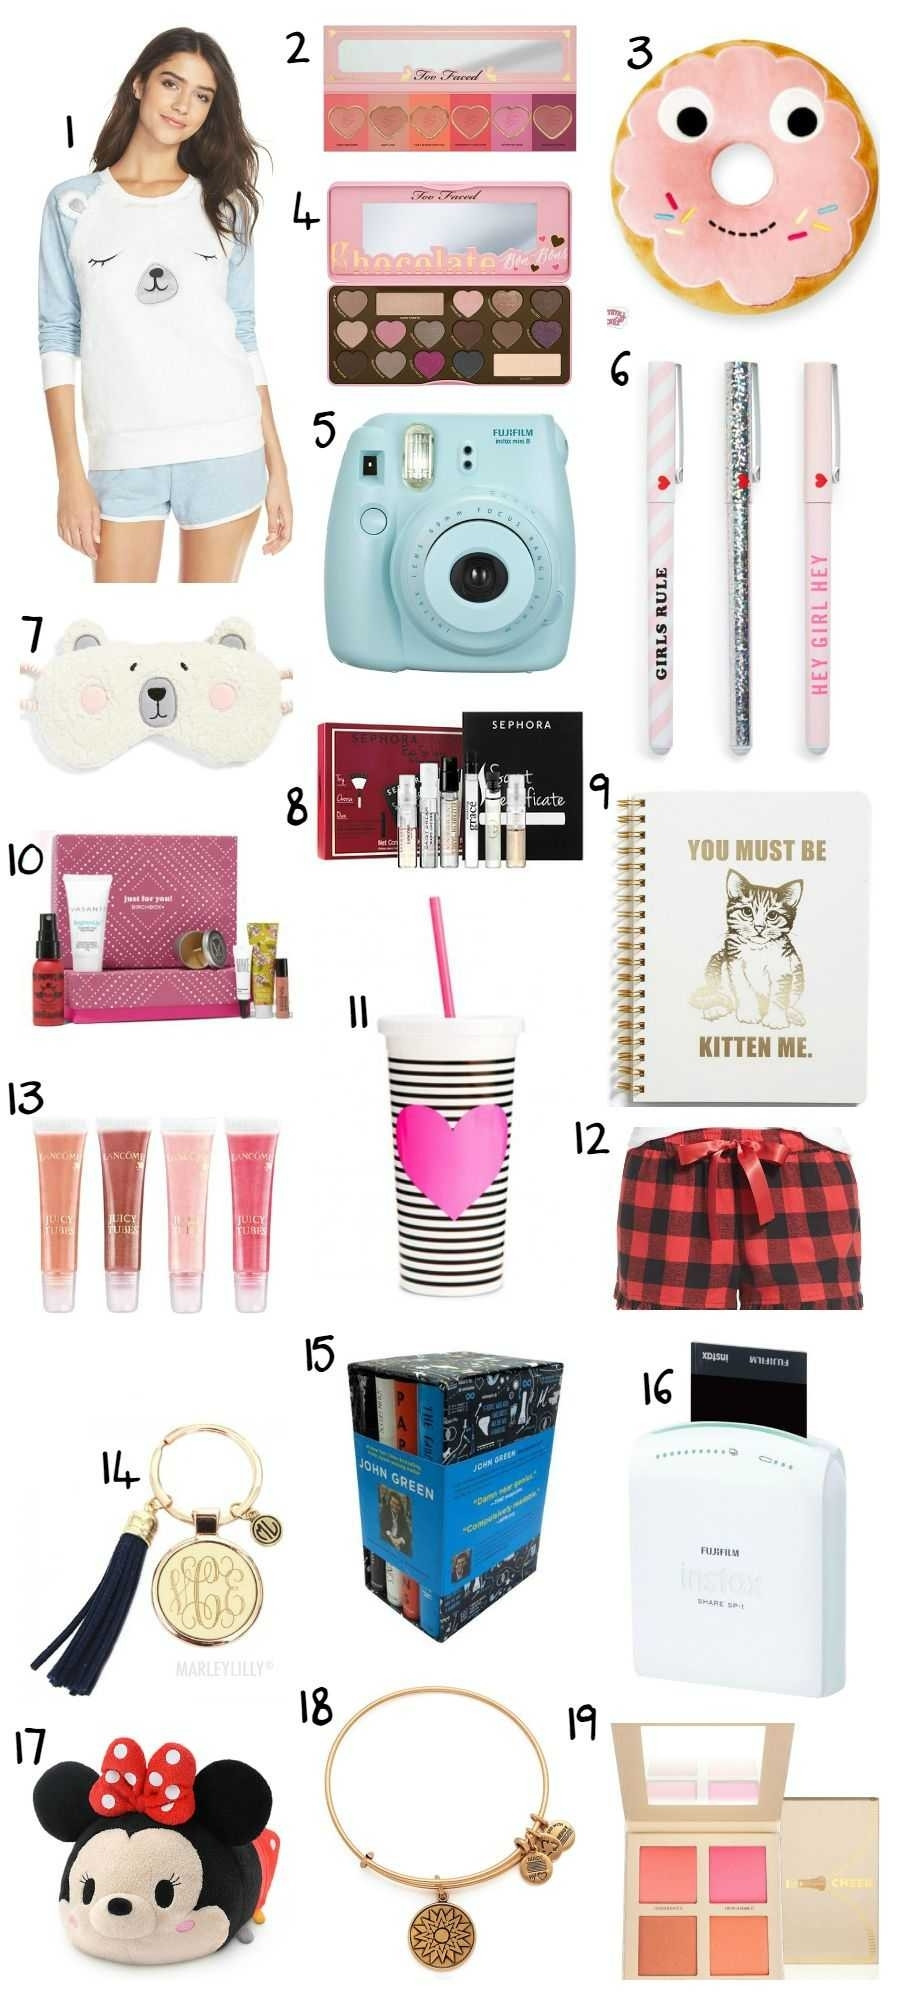 Unique Gift Ideas For Girlfriends
 10 Most Re mended Creative Christmas Gift Ideas For